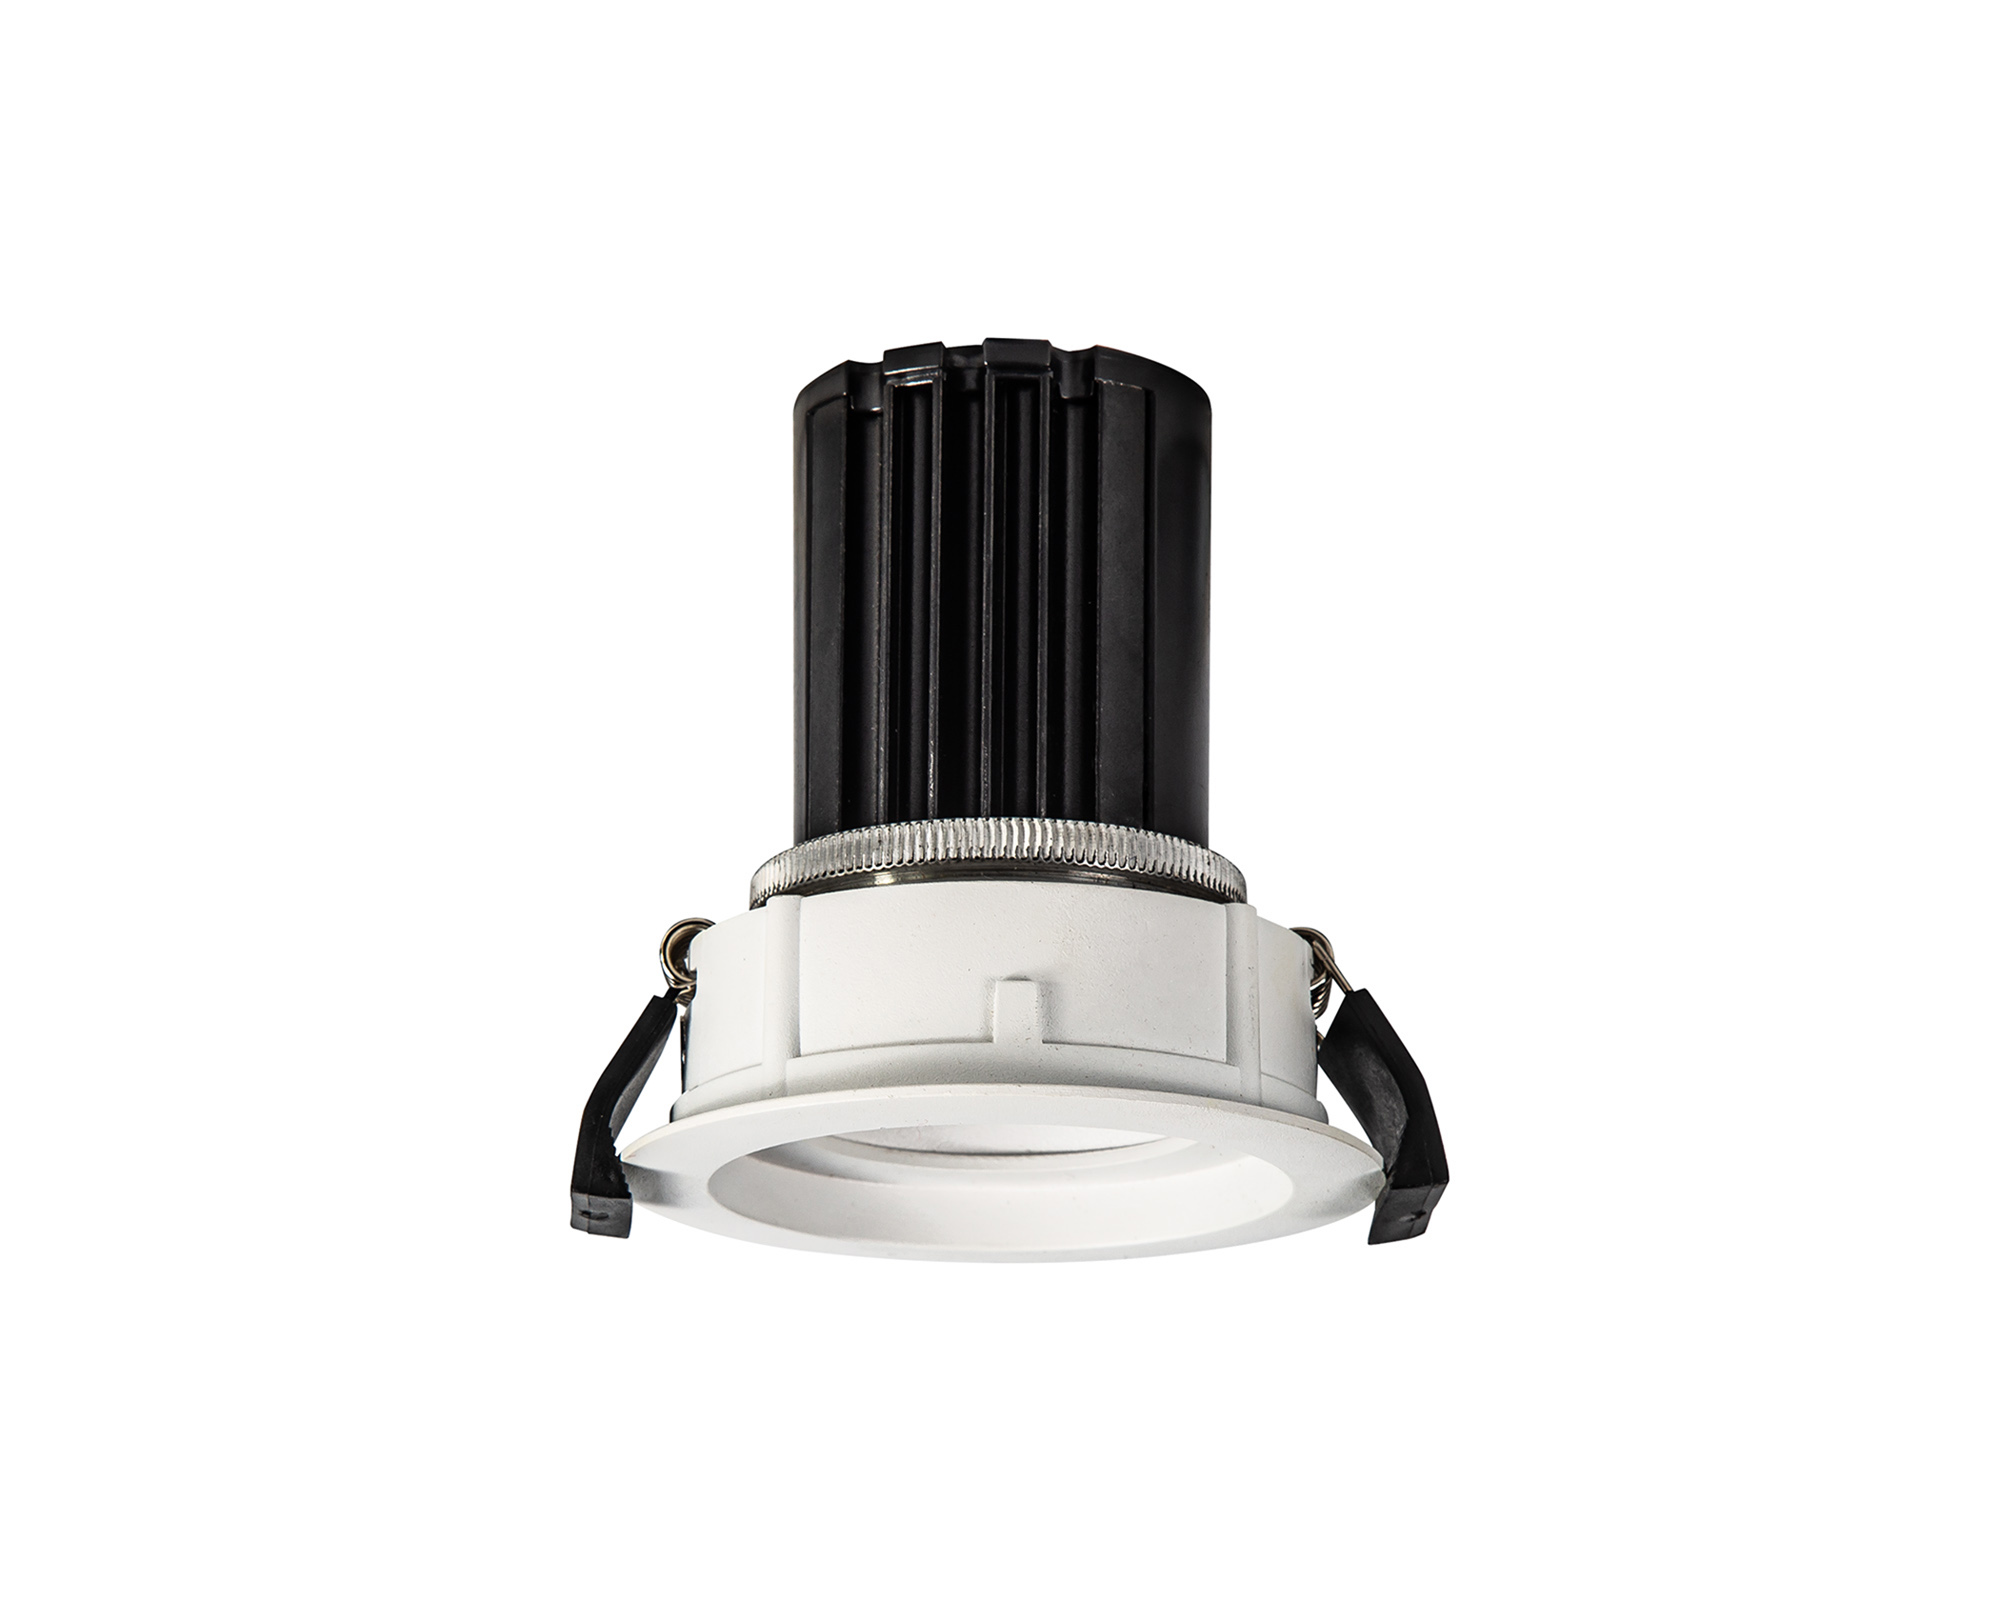 DM201231  Beppe 10 Tridonic powered 10W 2700K 750lm 12° CRI>90 LED Engine White Stepped Fixed Recessed Spotlight, IP20